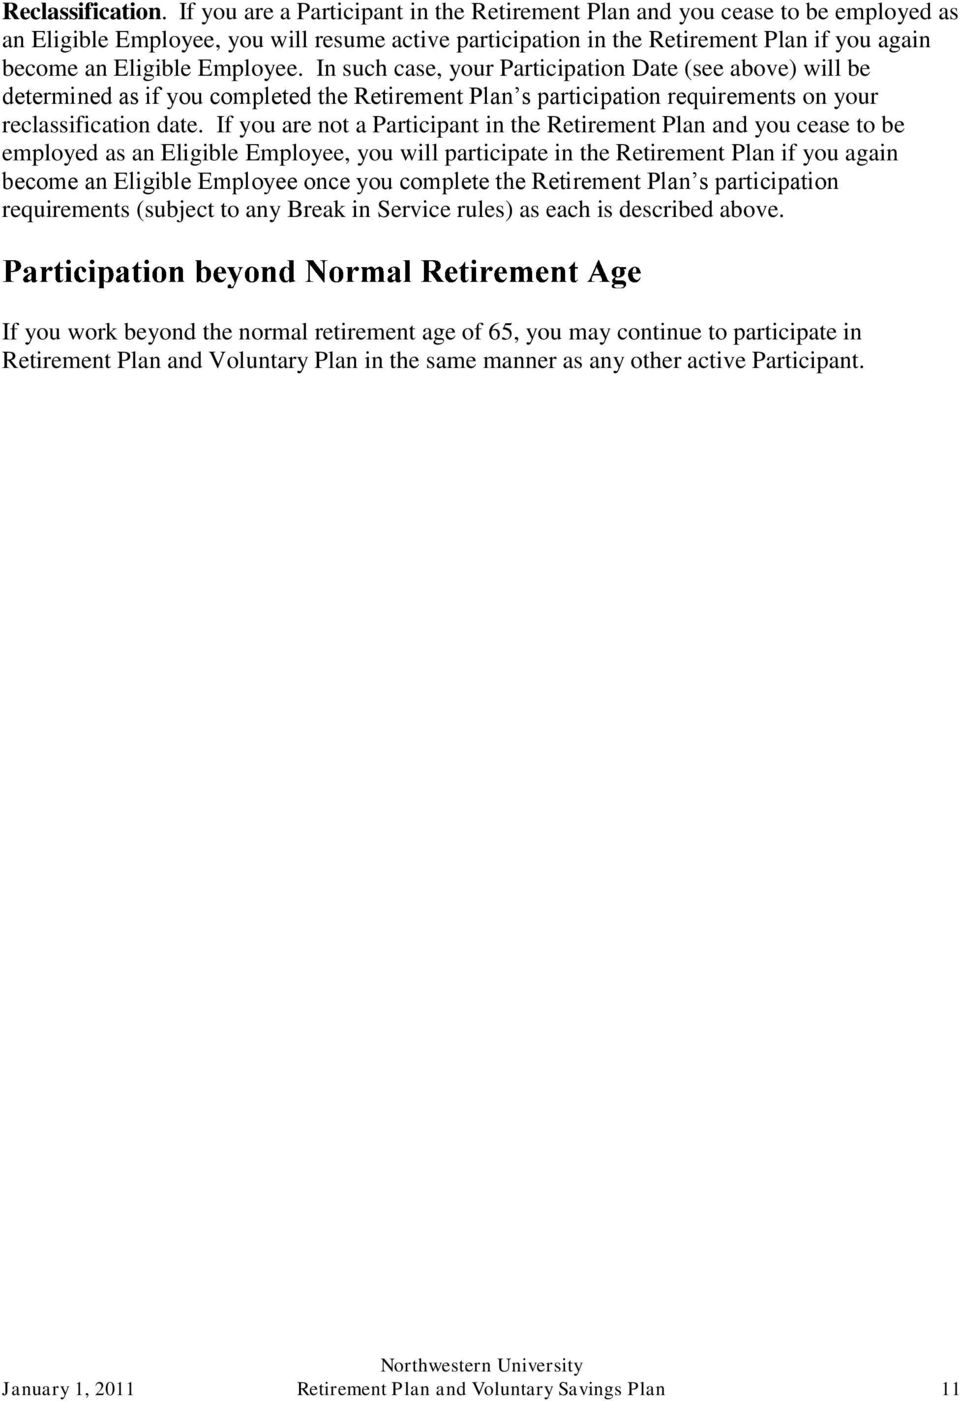 Employee. In such case, your Participation Date (see above) will be determined as if you completed the Retirement Plan s participation requirements on your reclassification date.